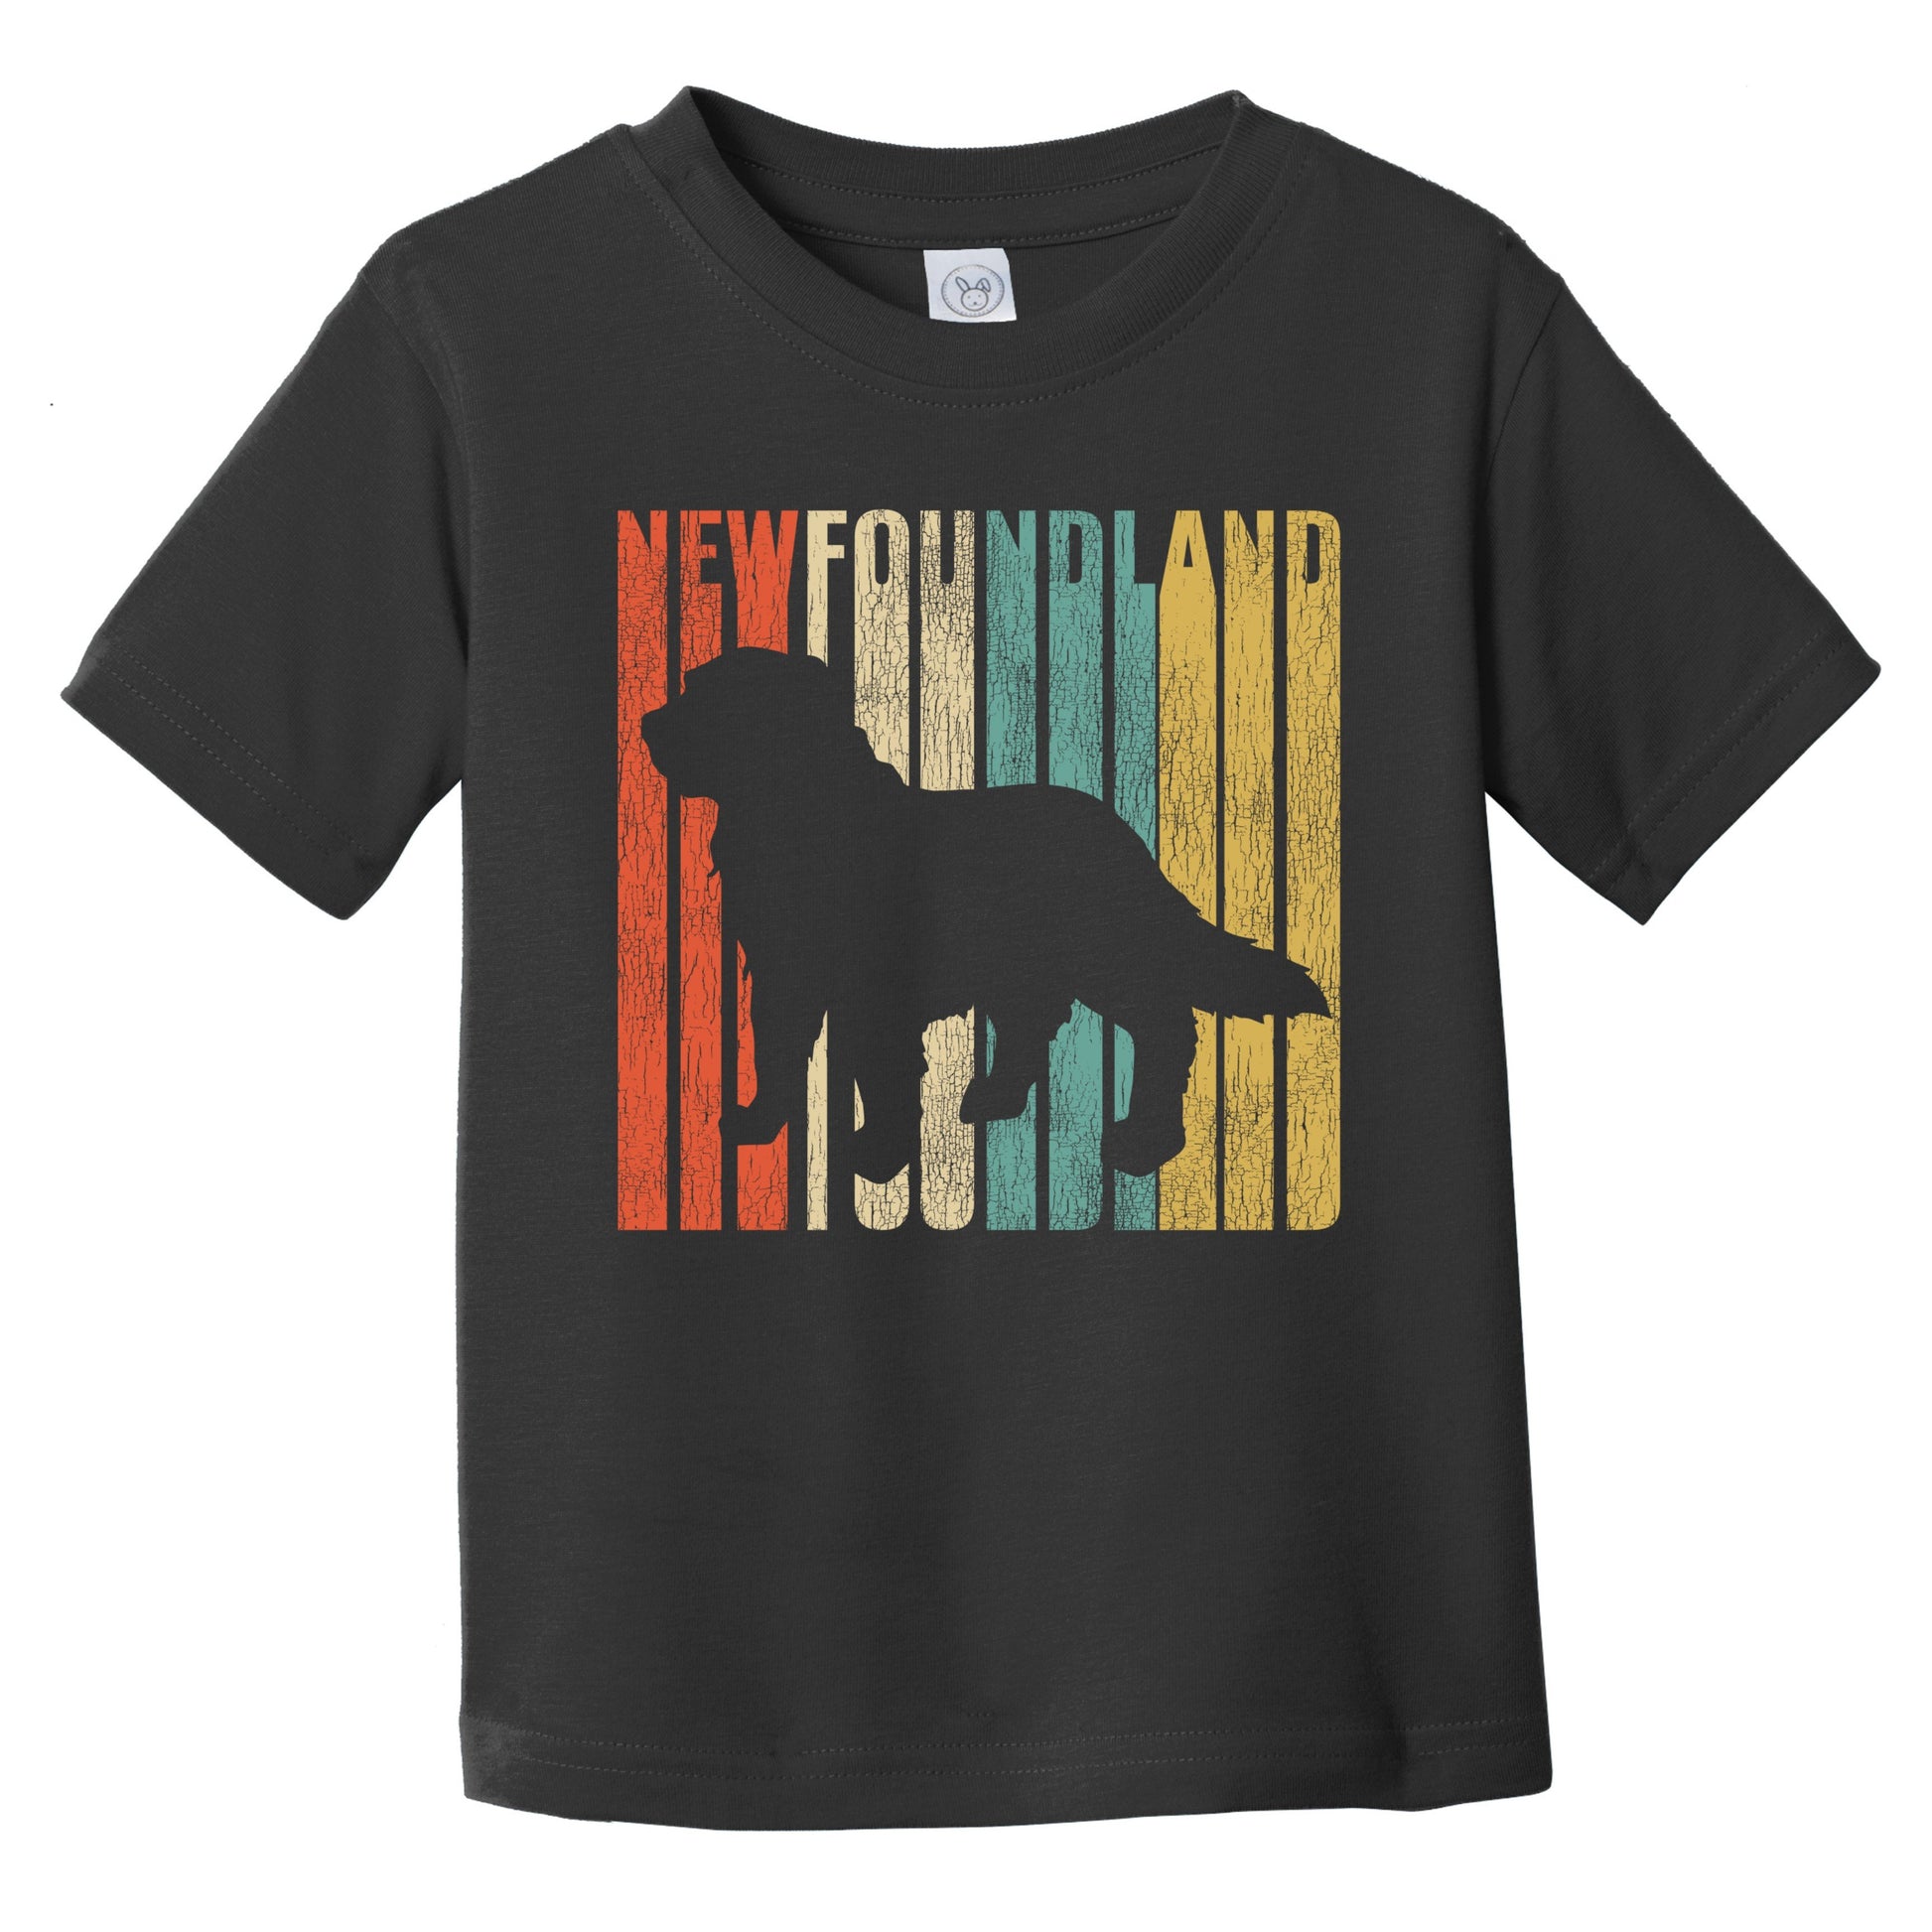 Retro Newfoundland Dog Silhouette Newfie Cracked Distressed Infant Toddler T-Shirt